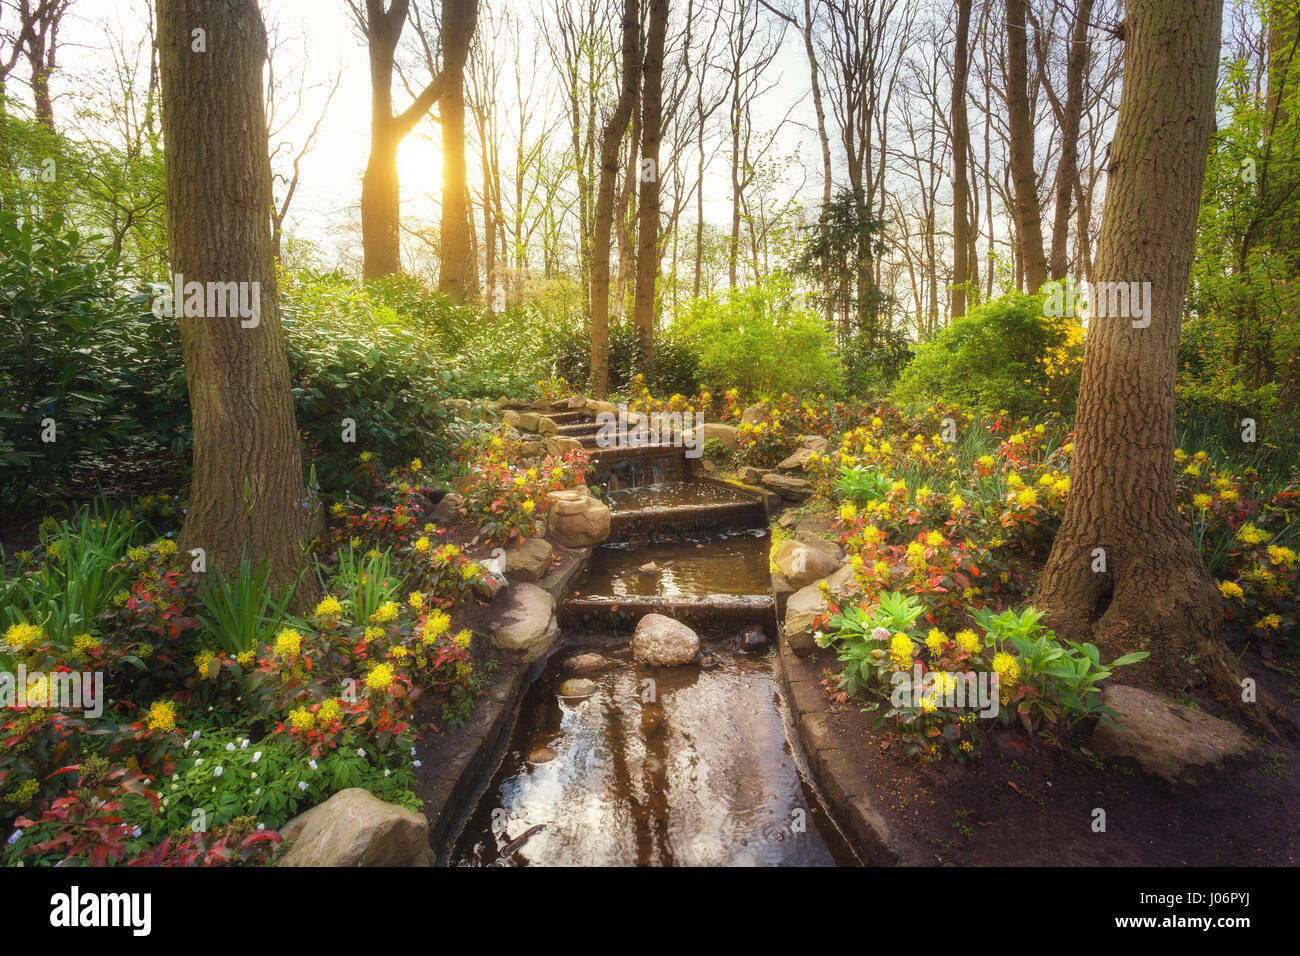 Amazing blooming spring park with water cascade in famous Keukenhof park, Netherlands. Beautiful landscape with colorful flowers, trees with green lea Stock Photo